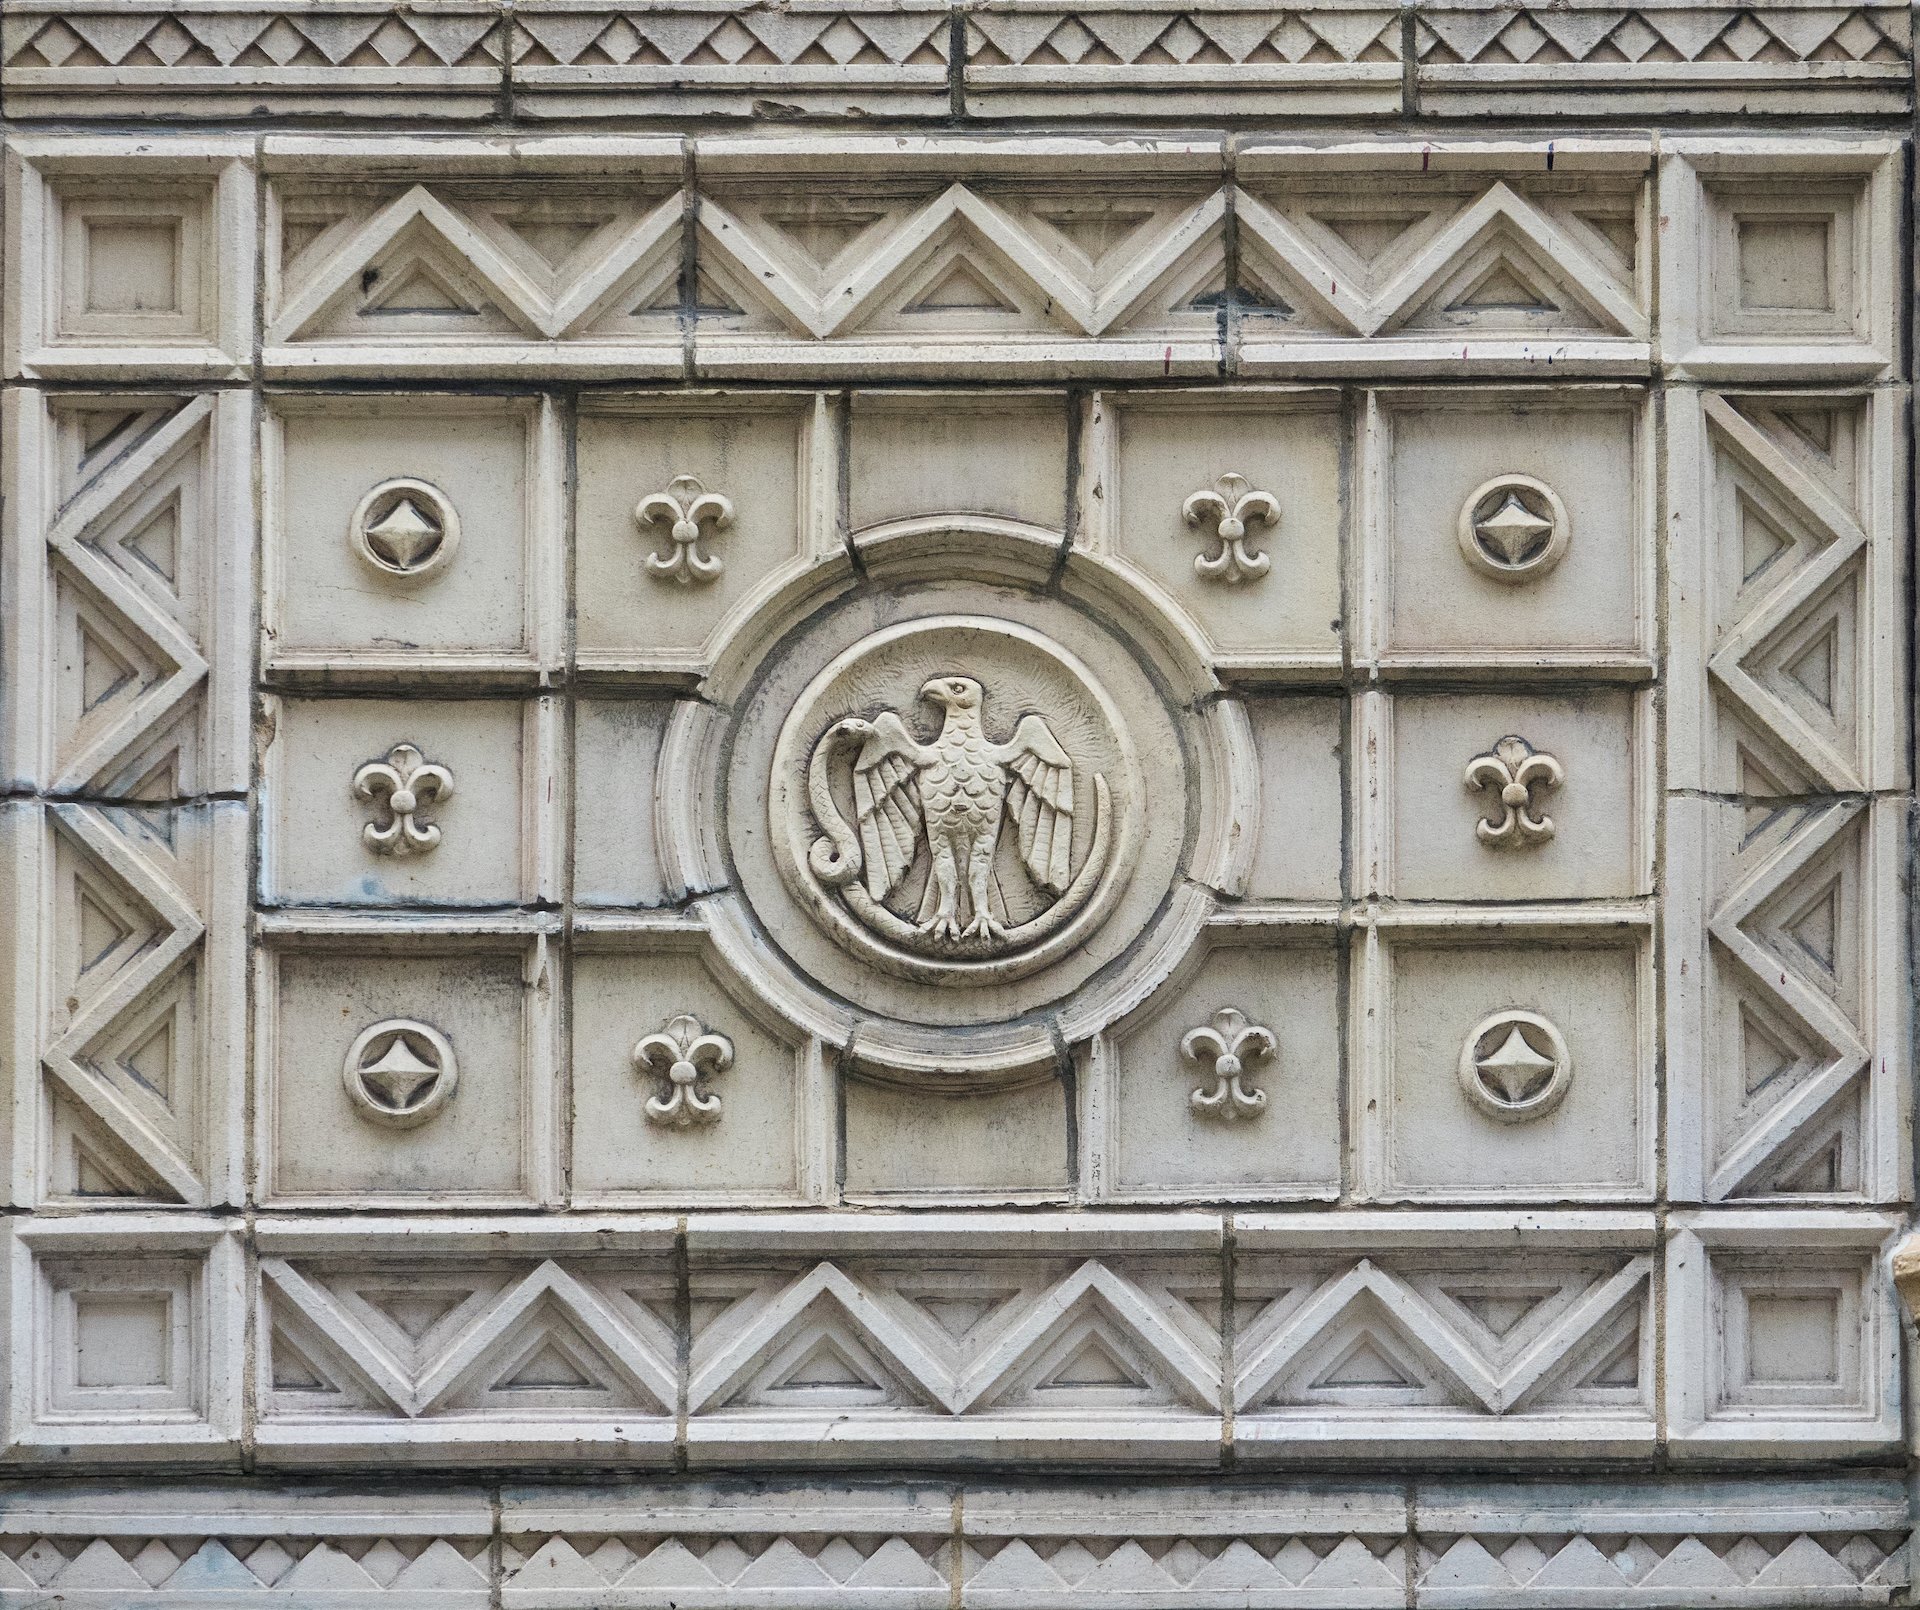  It’s one of the few in the city that used these tiles on the facade.  